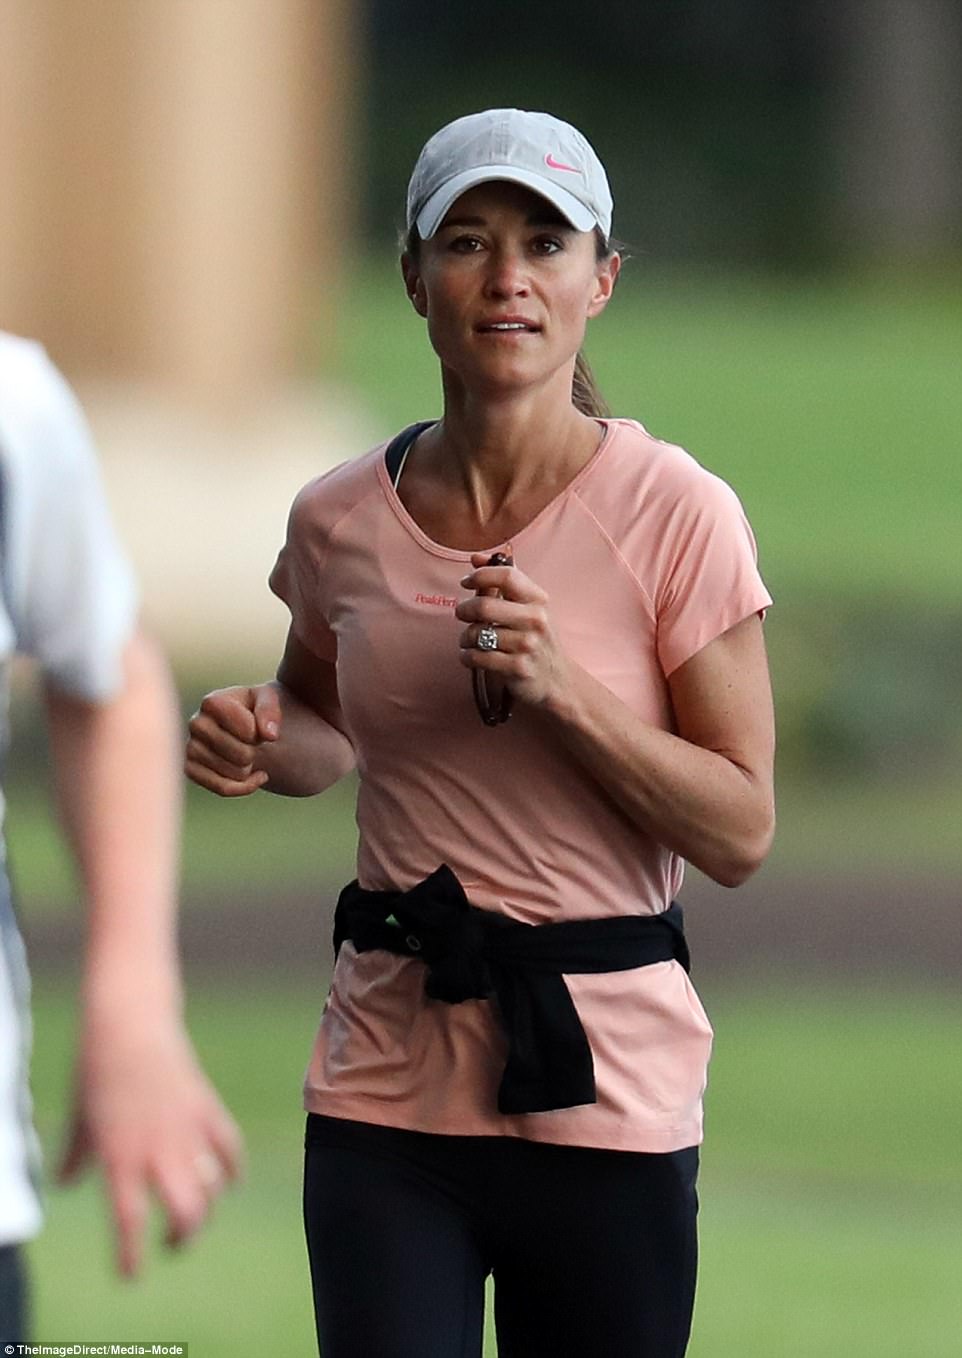 40FEDBCA00000578-4562718-Tanned_and_toned_Pippa_wore_a_baseball_cap_pink_athletic_shirt_b-a-63_1496323334121